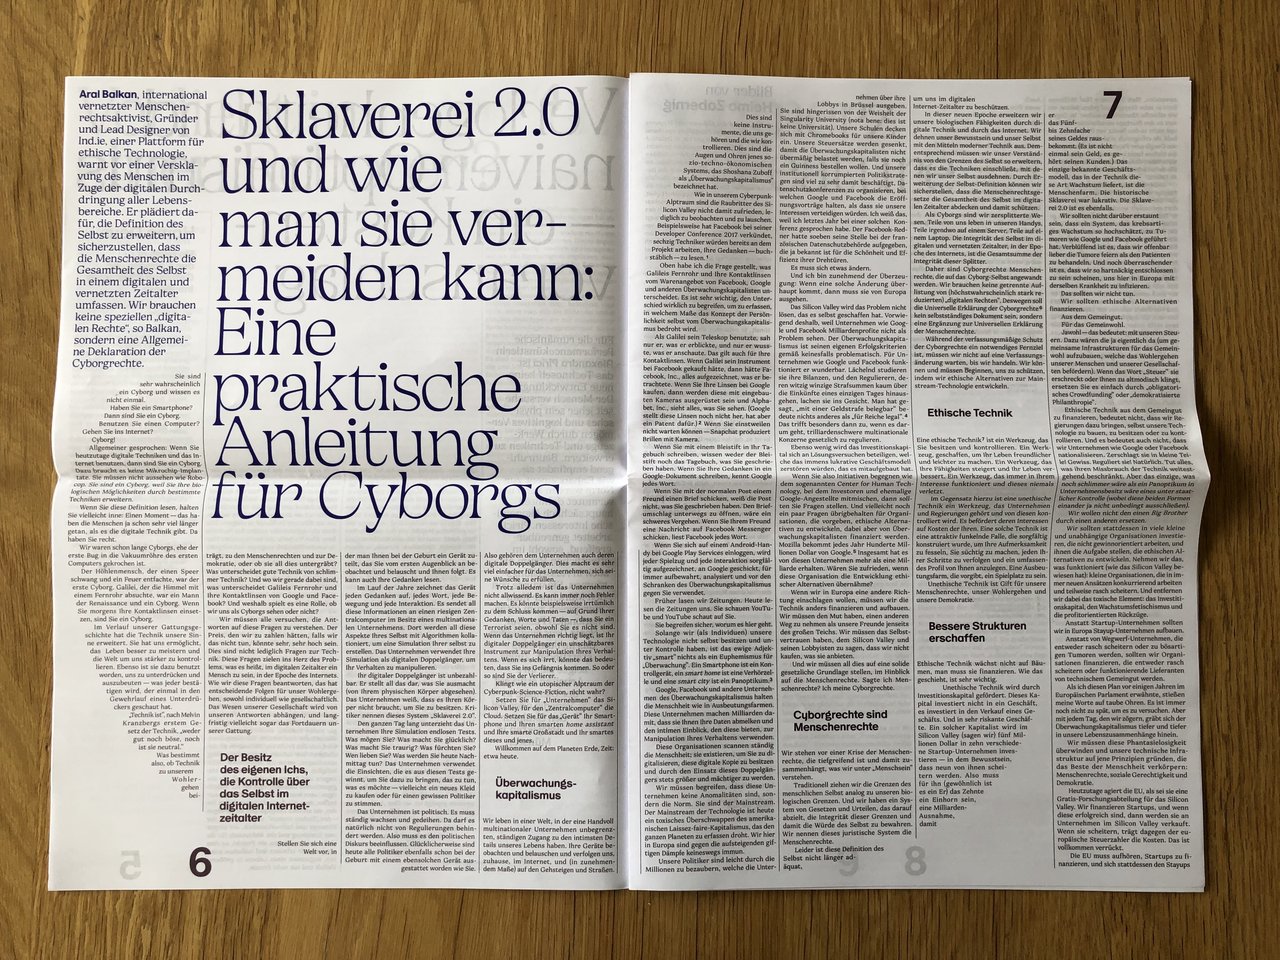 Magazine on wooden table, open, showing two-page article spread.